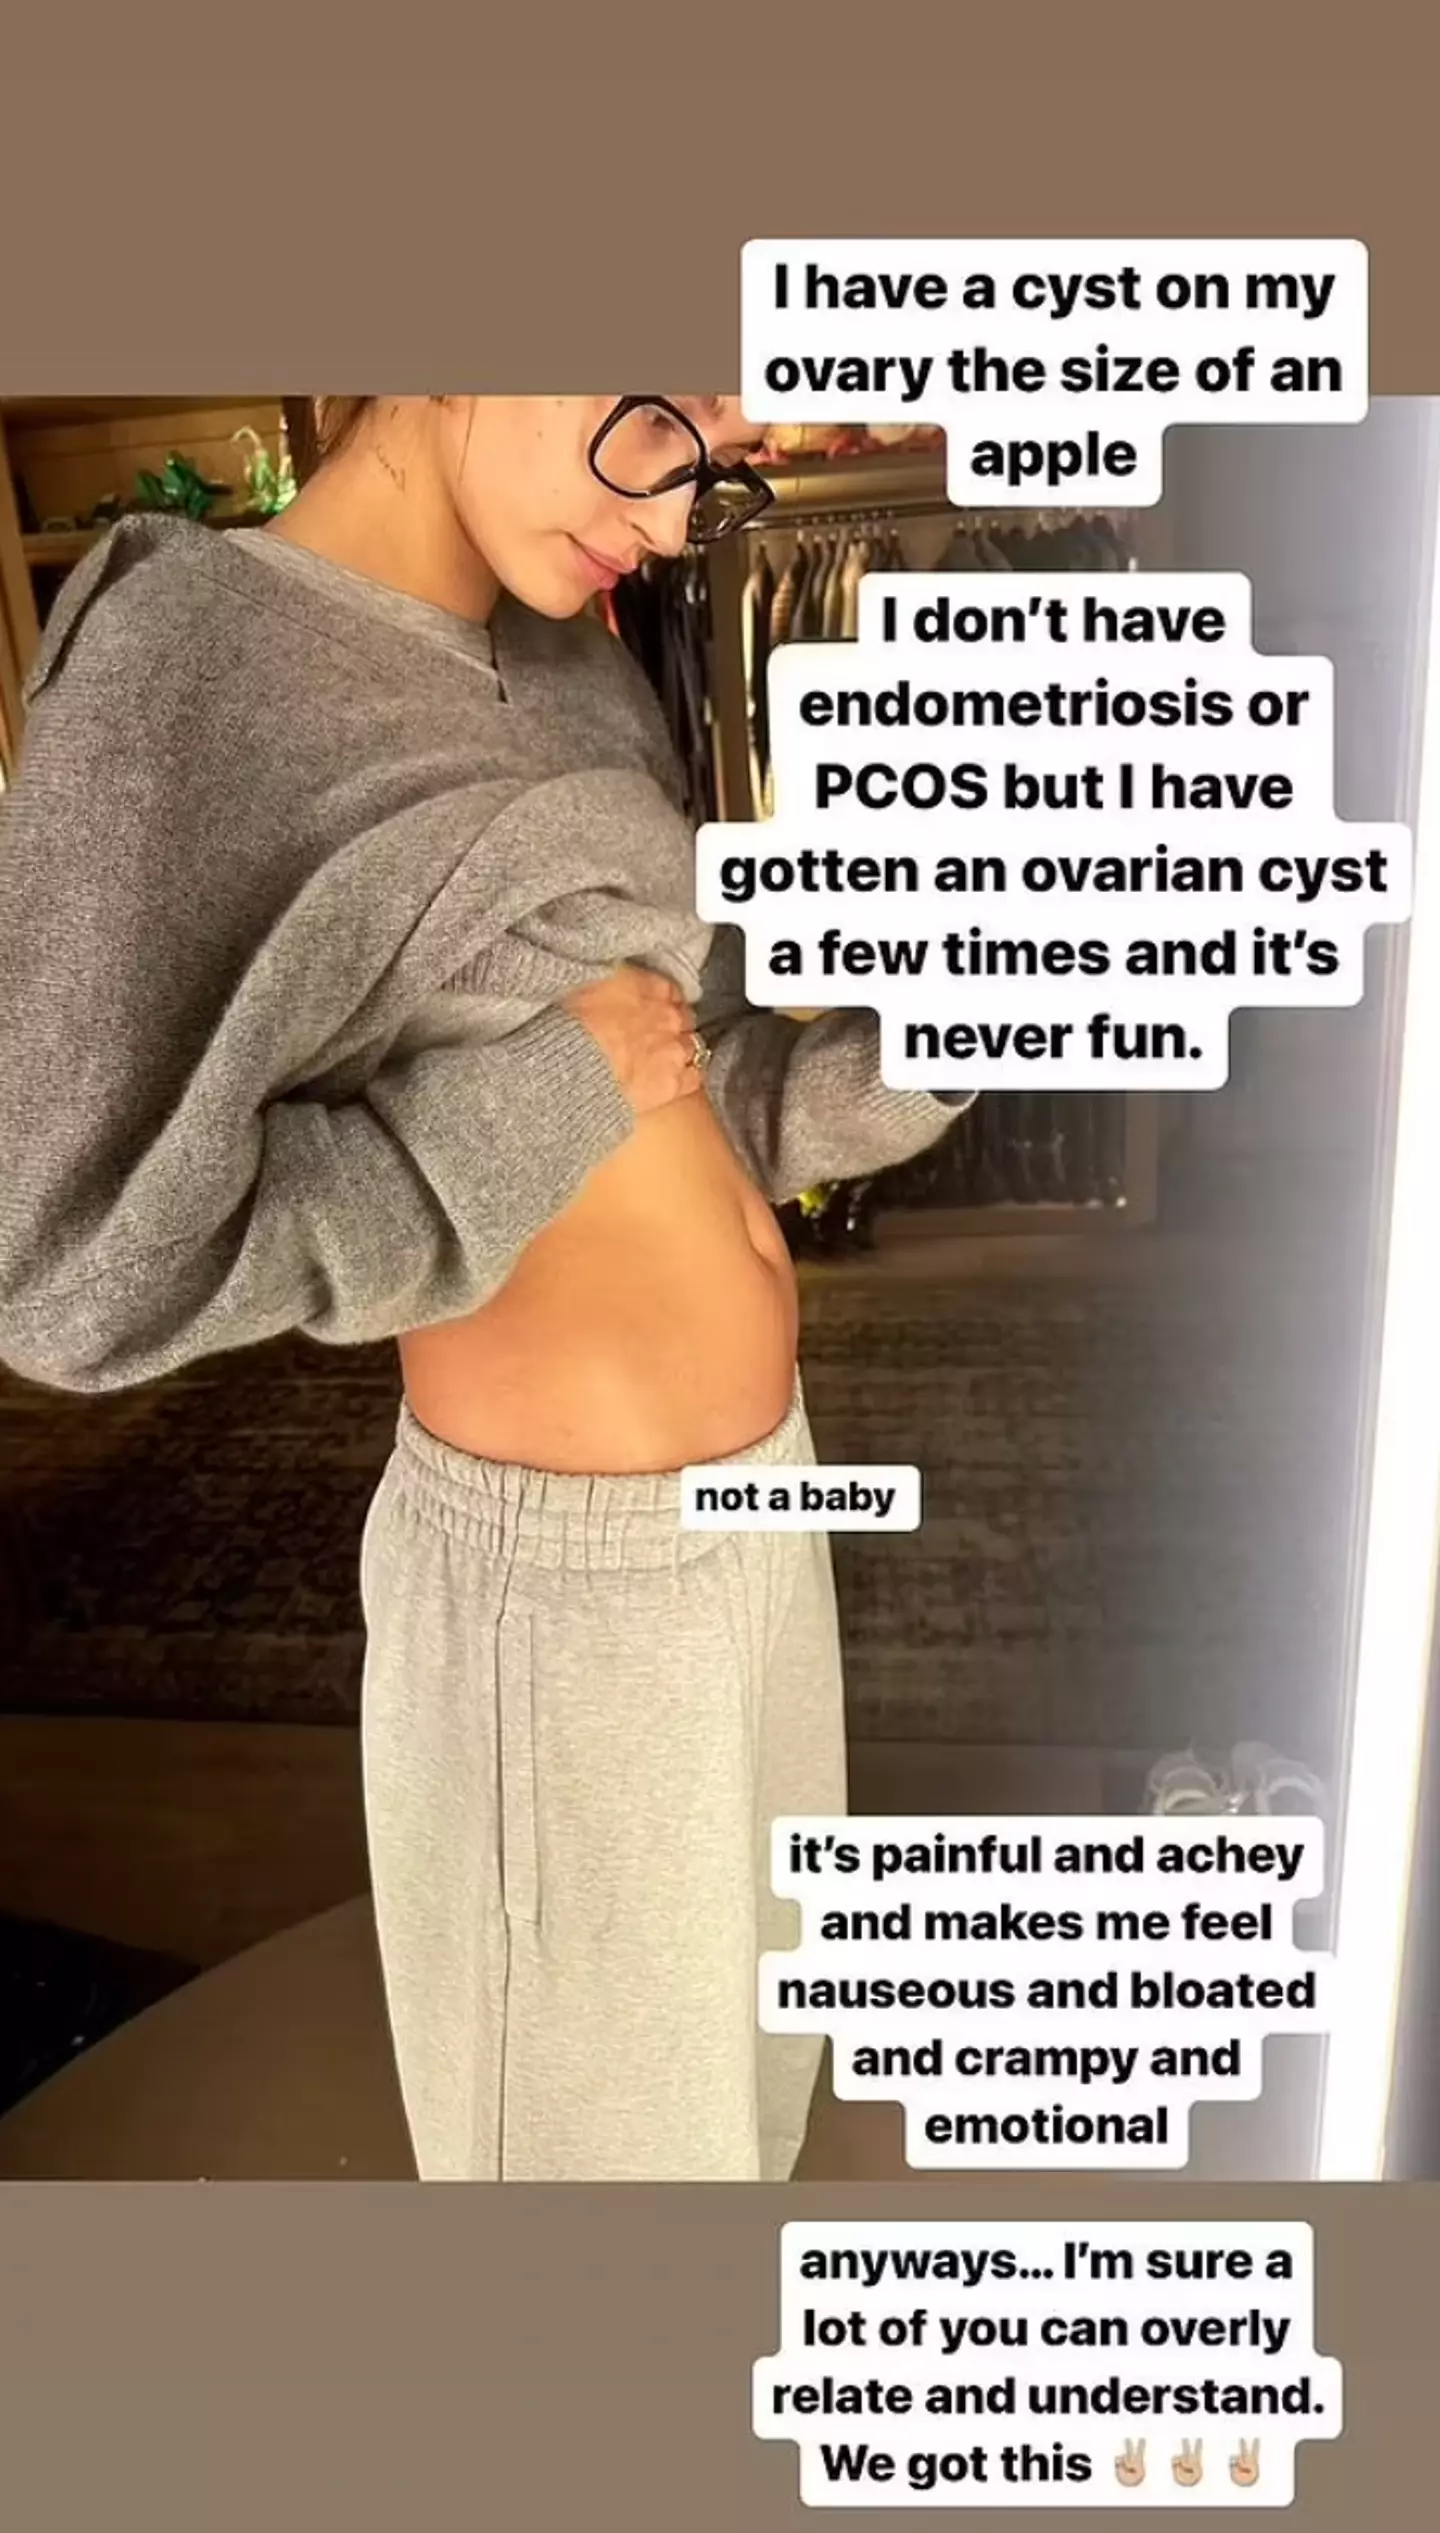 Hailey told followers she was suffering with an ovarian cyst.